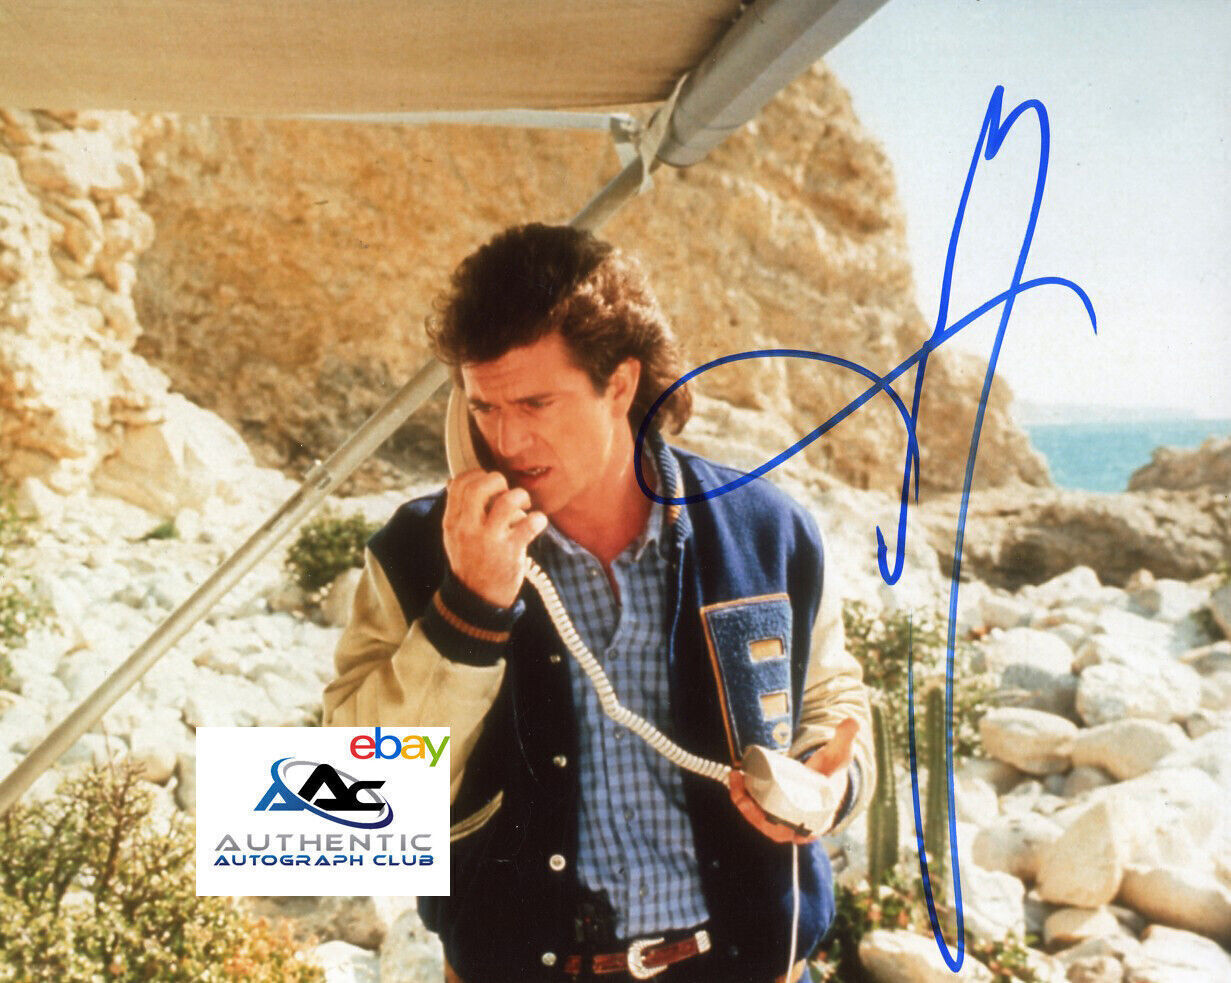 MEL GIBSON AUTOGRAPH SIGNED 8x10 PHOTO BRAVEHEART LETHAL WEAPON MAD MAX COA